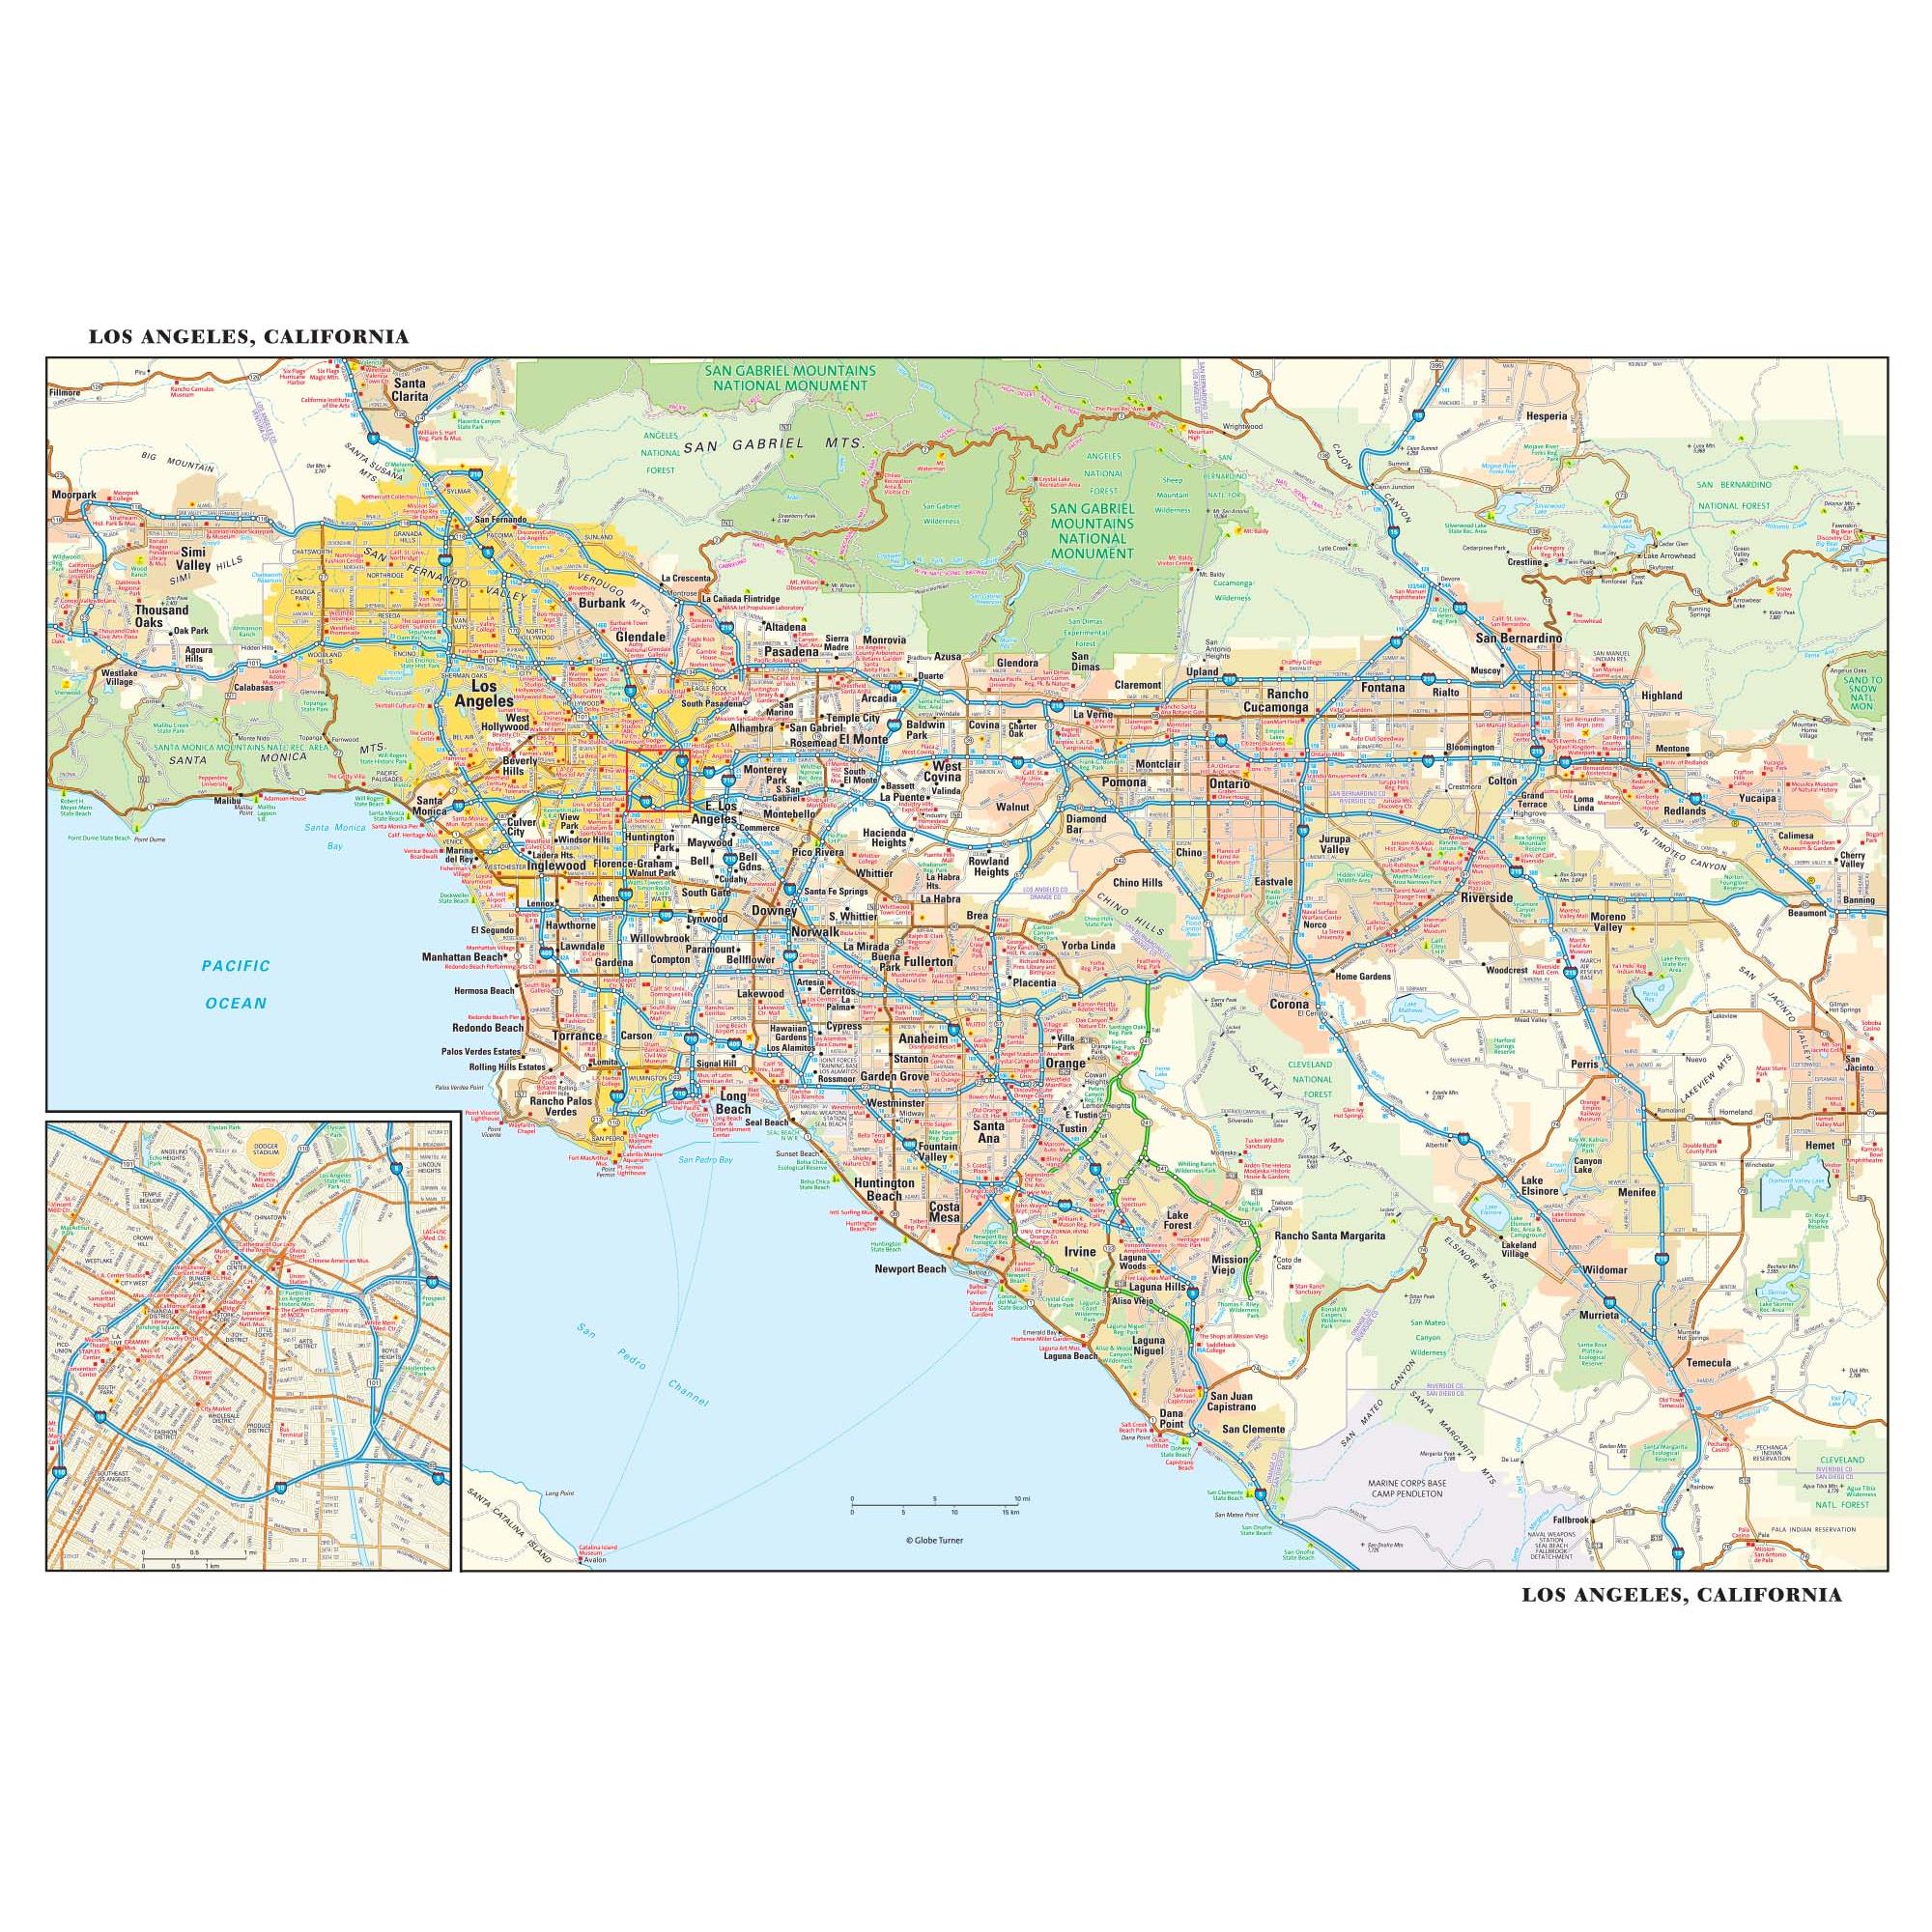 Los Angeles-Long Beach Detailed Area Wall Map w/Zip Codes 2 sizes 